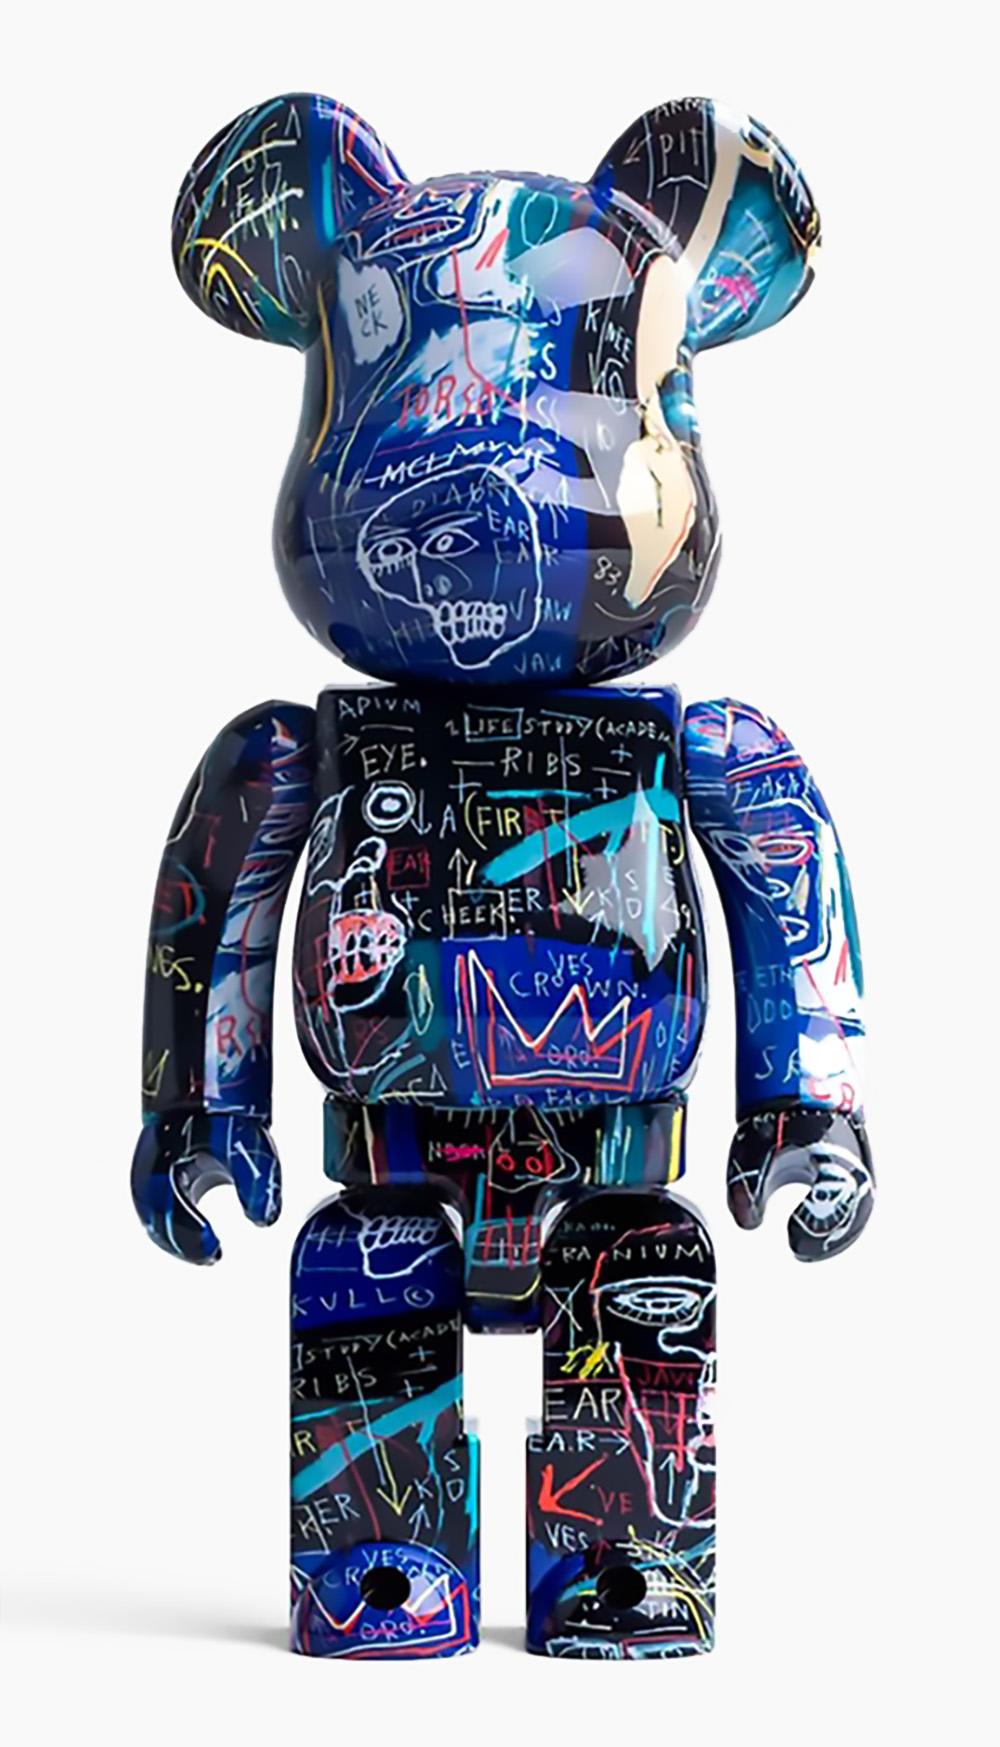 Bearbrick and Estate of Jean-Michel Basquiat 400% Figures: Set of 4 works (c.2019-2021):
Unique, timeless Basquiat collectibles, each trademarked & licensed by the Estate of Jean-Michel Basquiat. The partnered figures reveals the late iconic